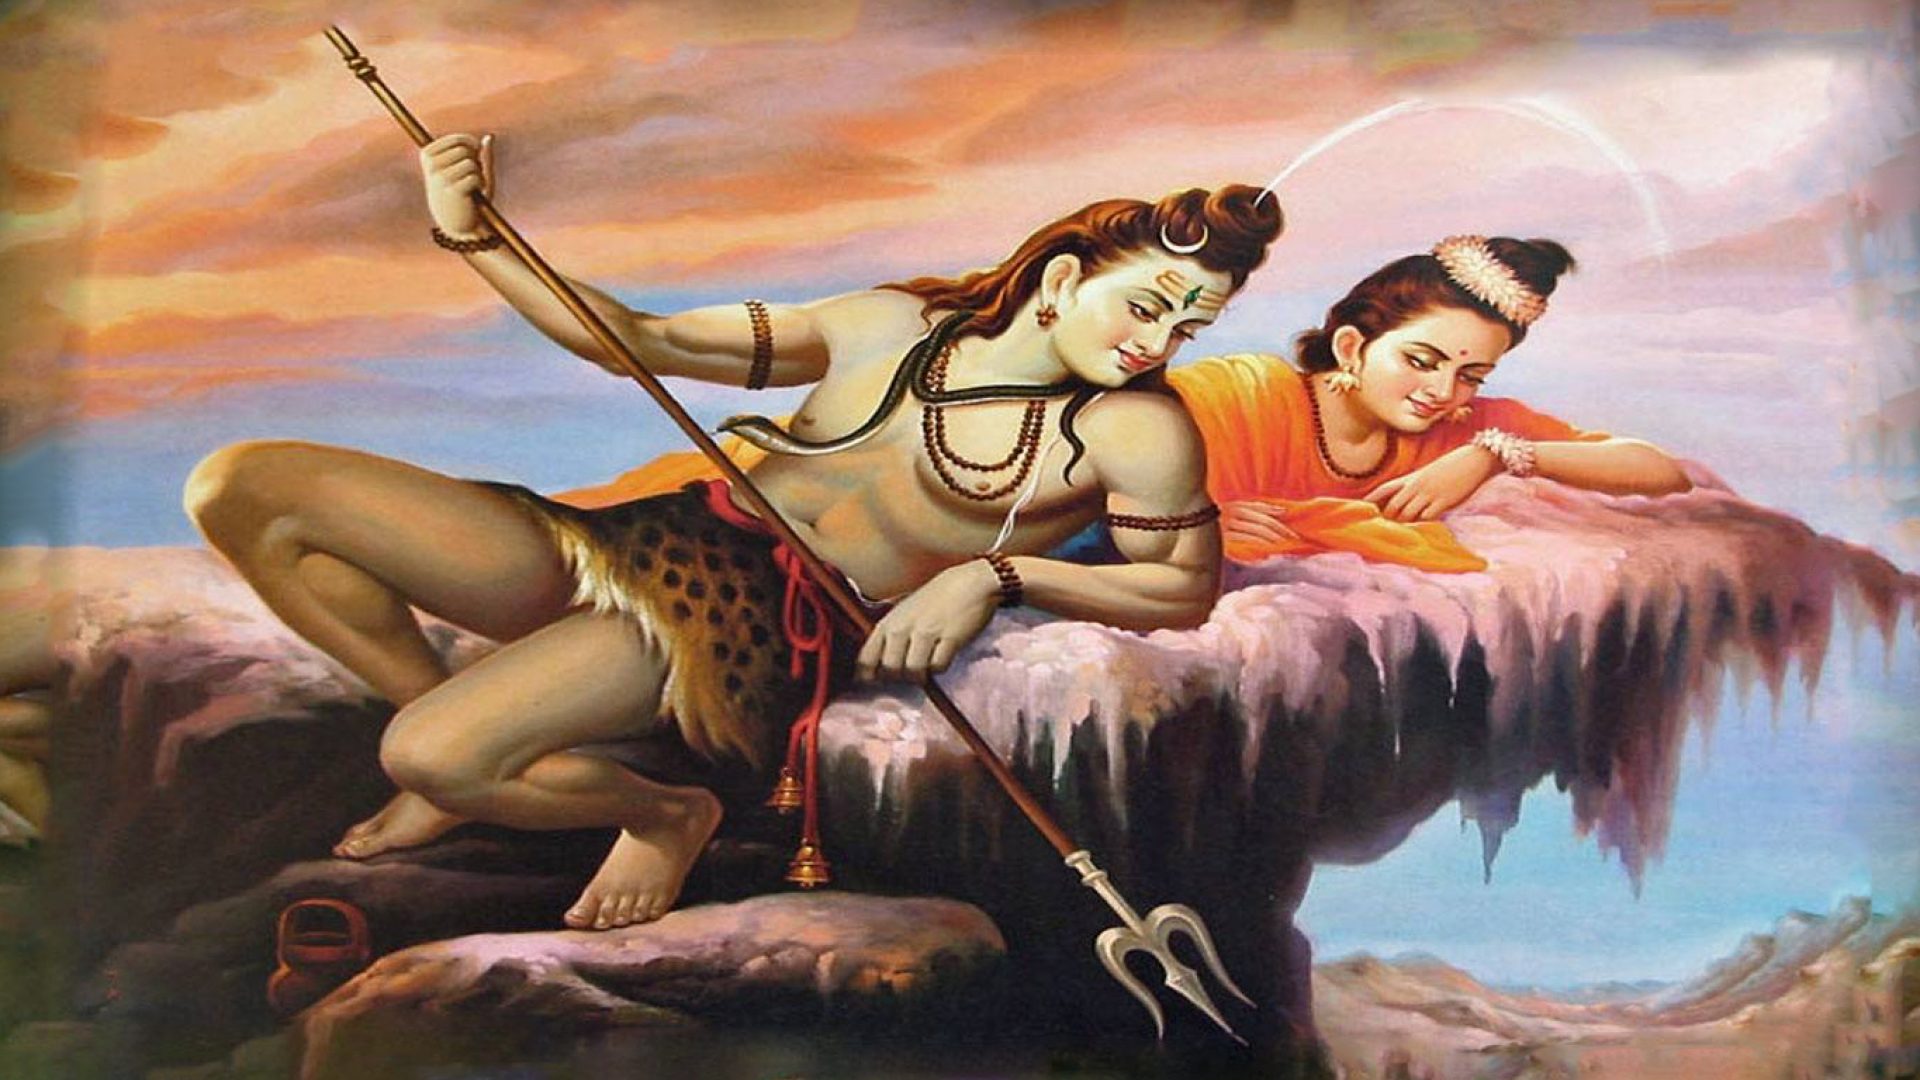 Lord Shiv Parvati Images Browse 872 Stock Photos  Vectors Free Download  with Trial  Shutterstock